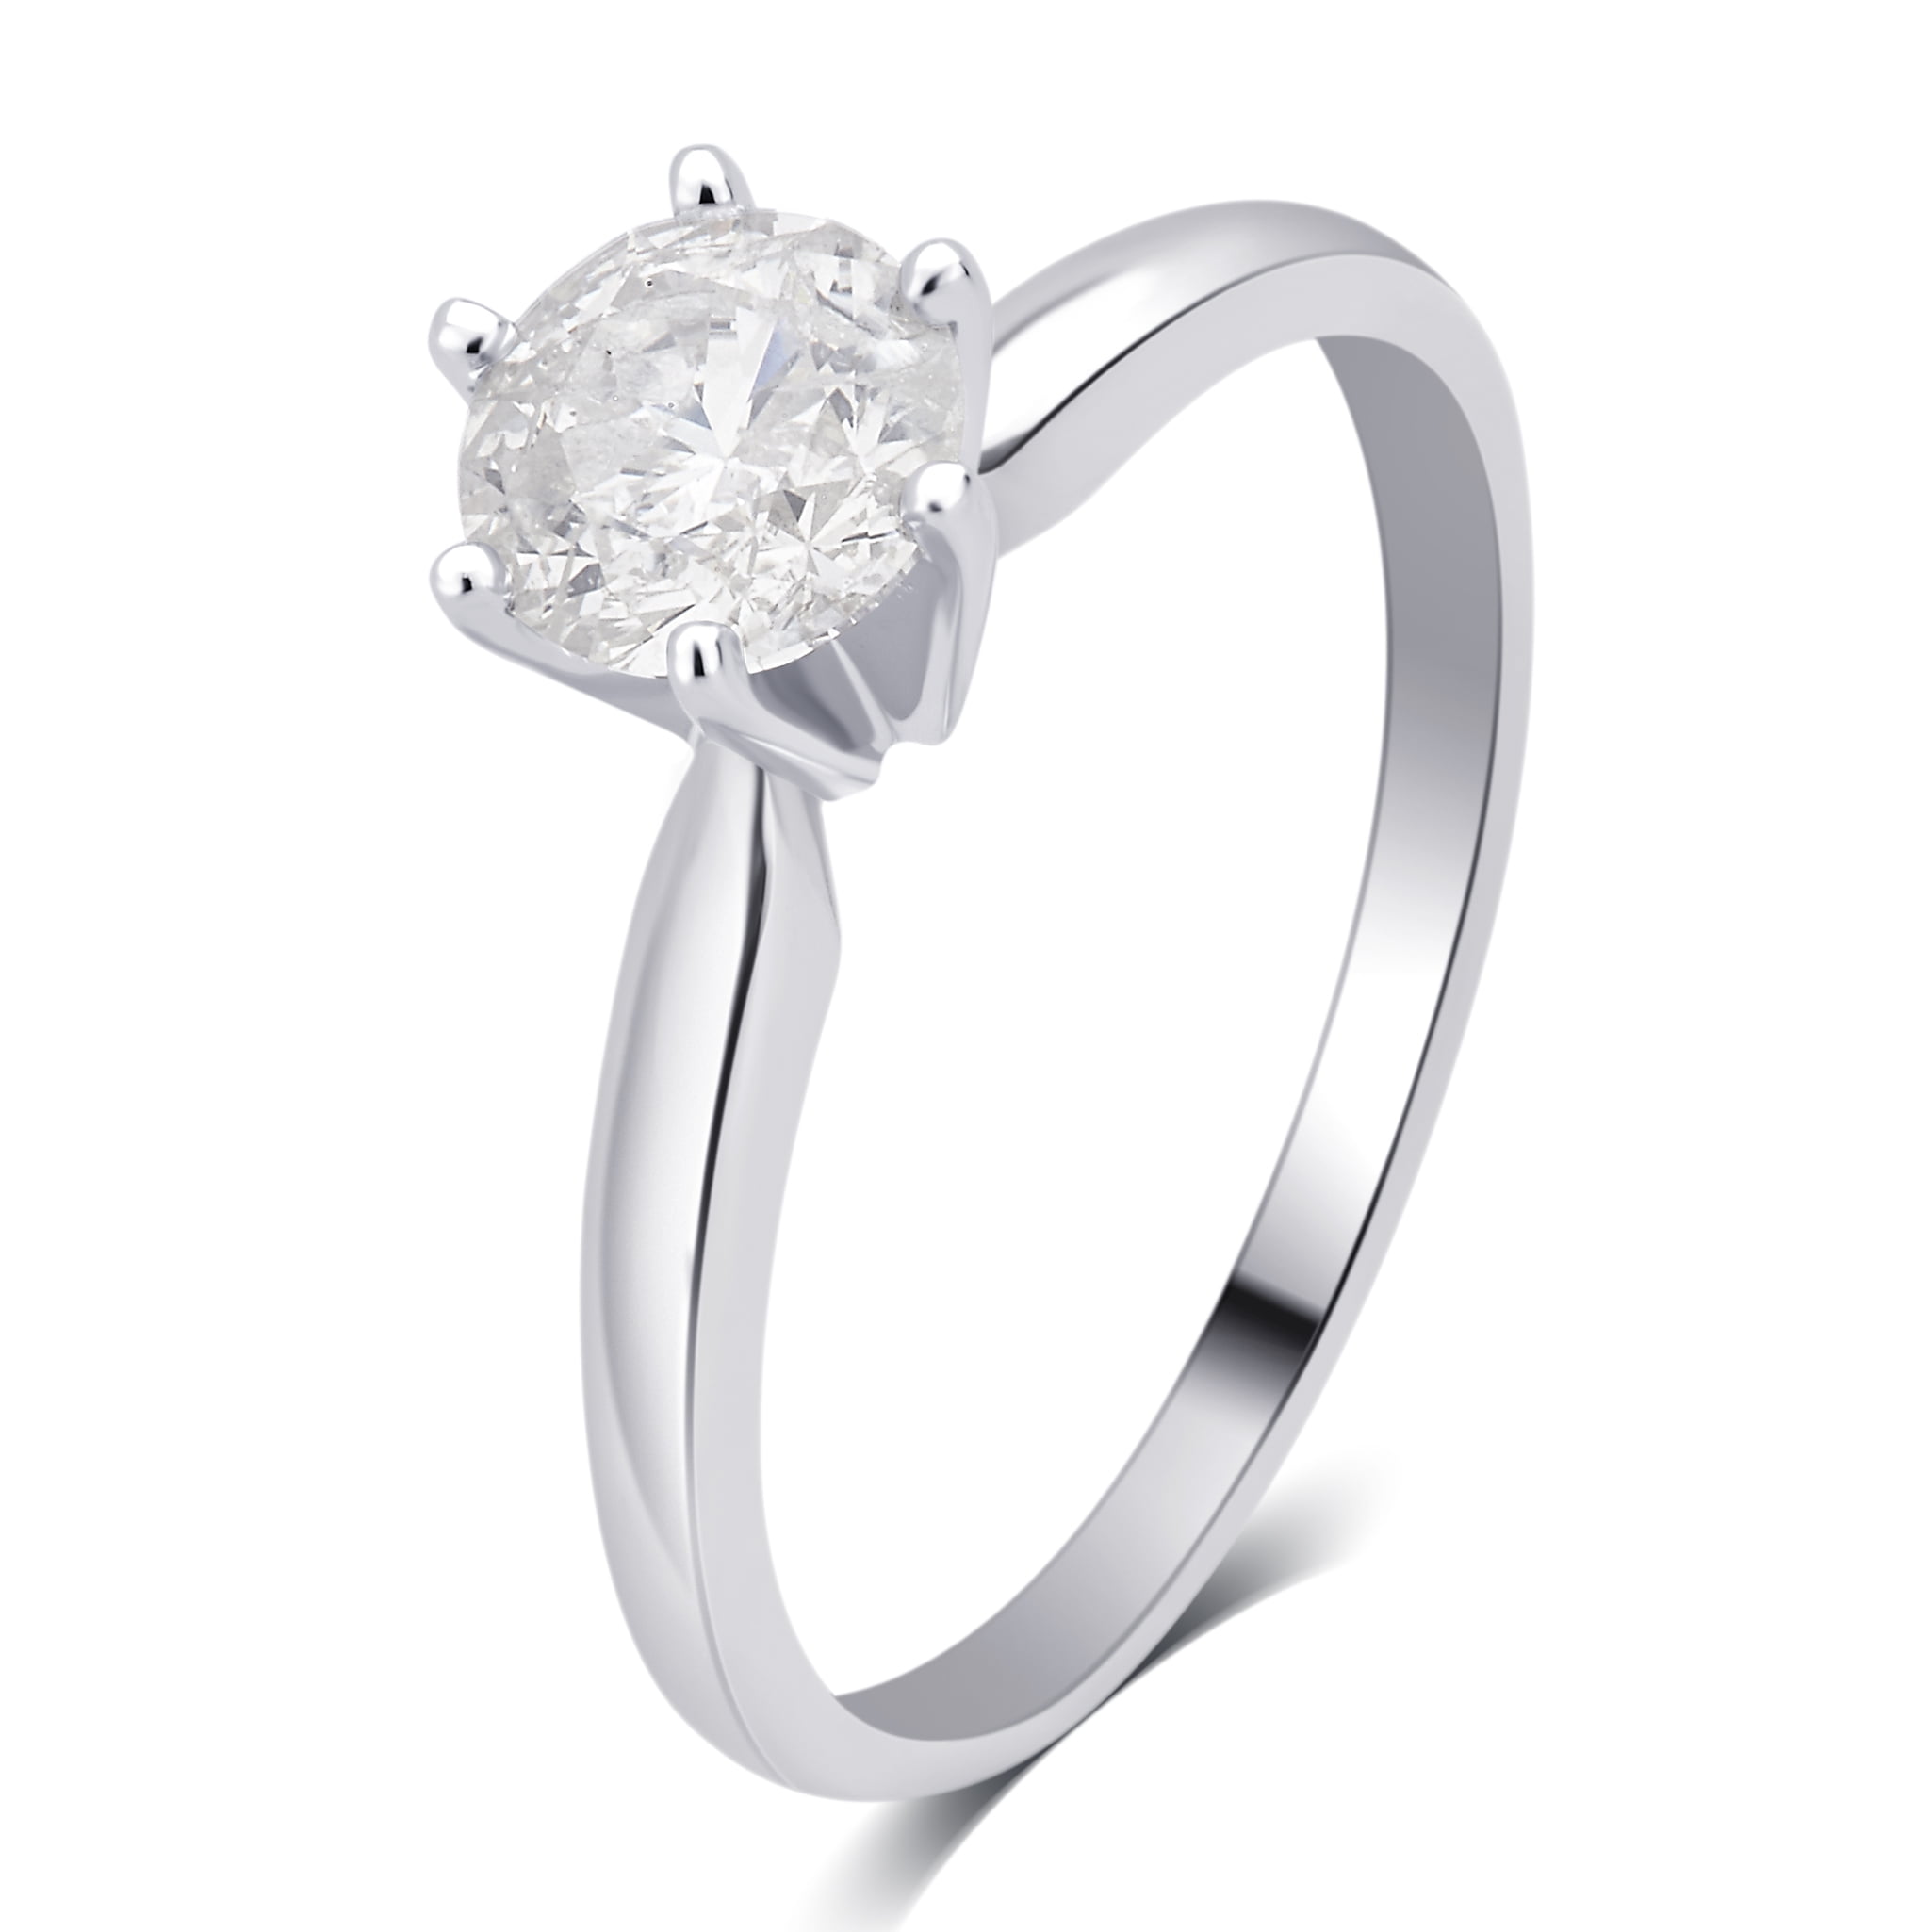 Details about   Solid 14KT White Gold Fabulous Round Cut 1.24 Ct Solitaire Engagement Ring 